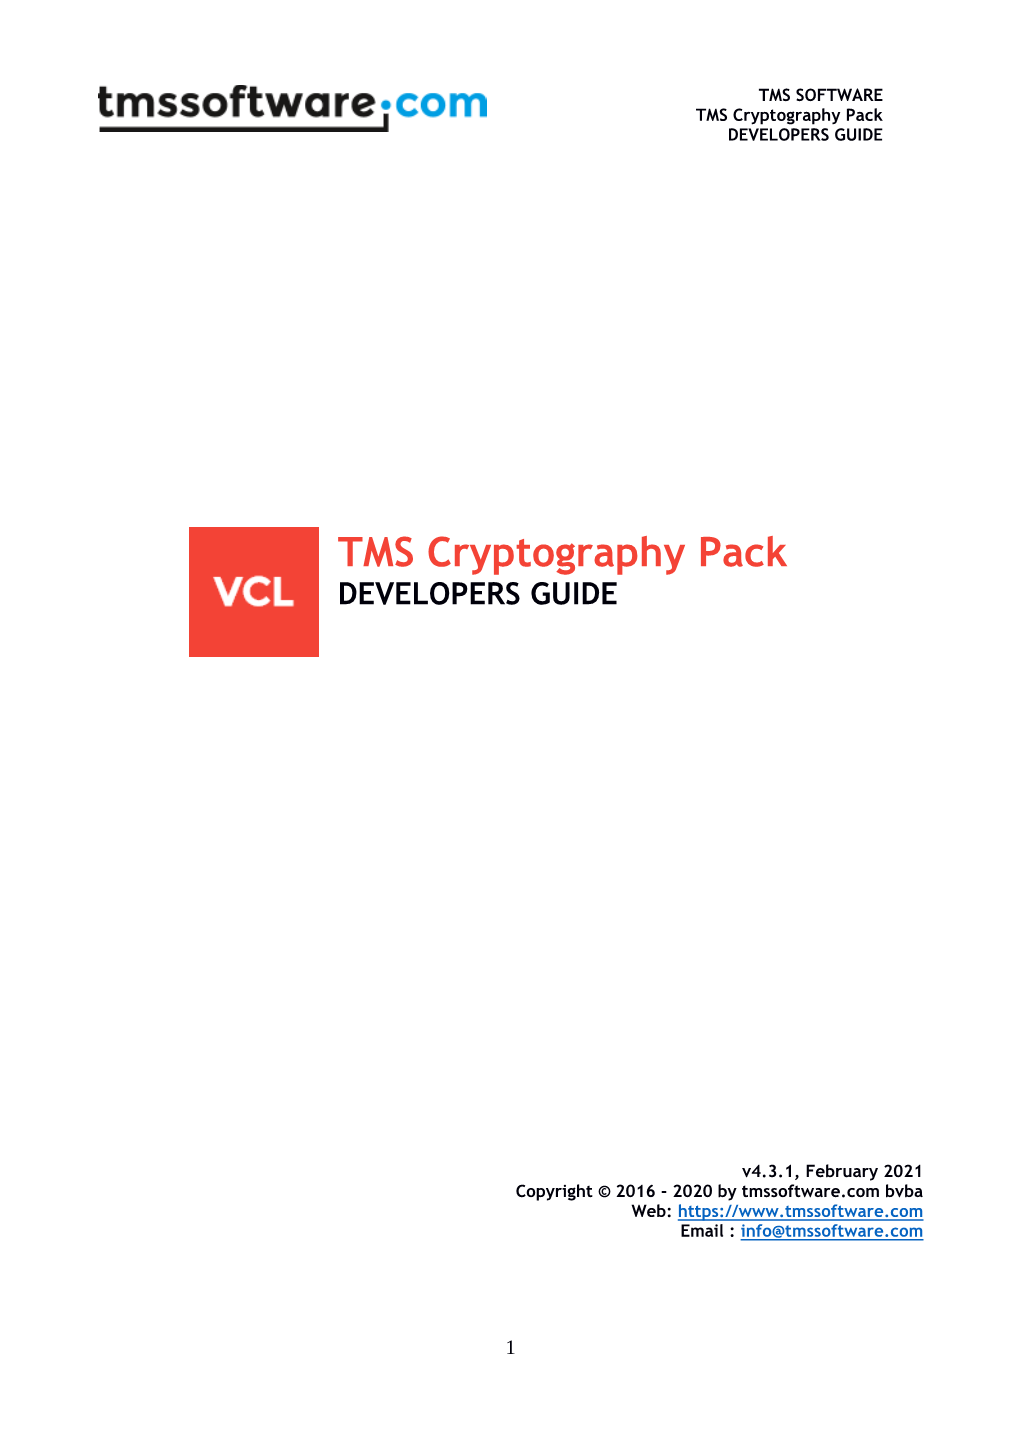 TMS Cryptography Pack DEVELOPERS GUIDE